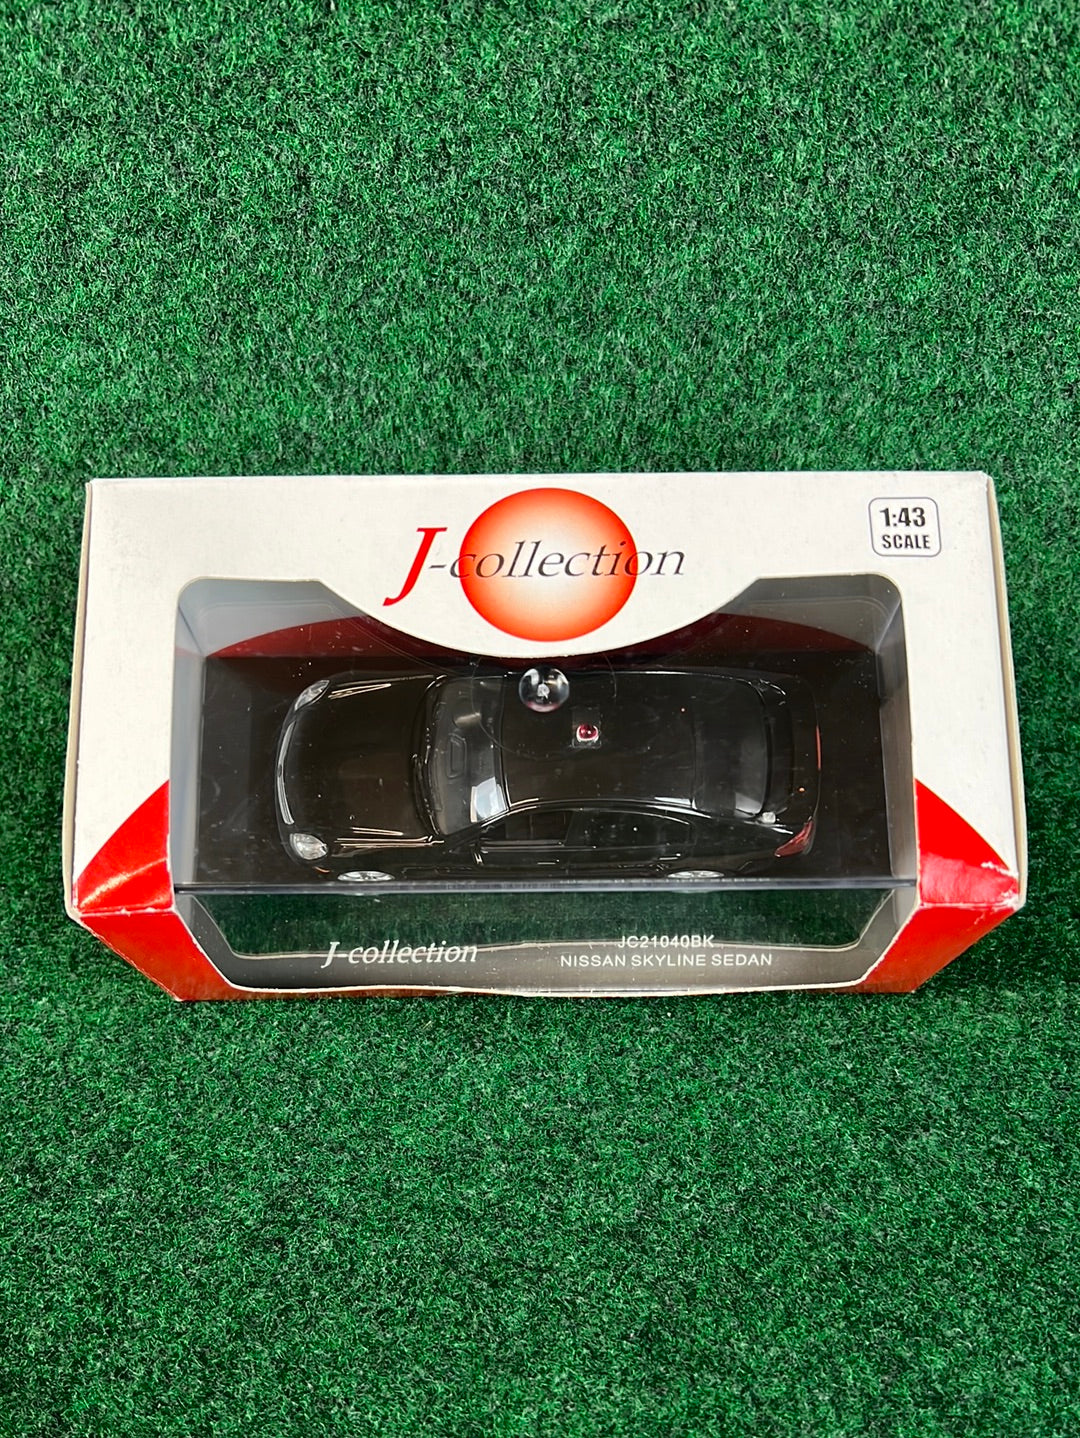 J-Collection (KYOSHO) Nissan Skyline 300GT (Infiniti G35) Modified 1/43 Scale Diecast